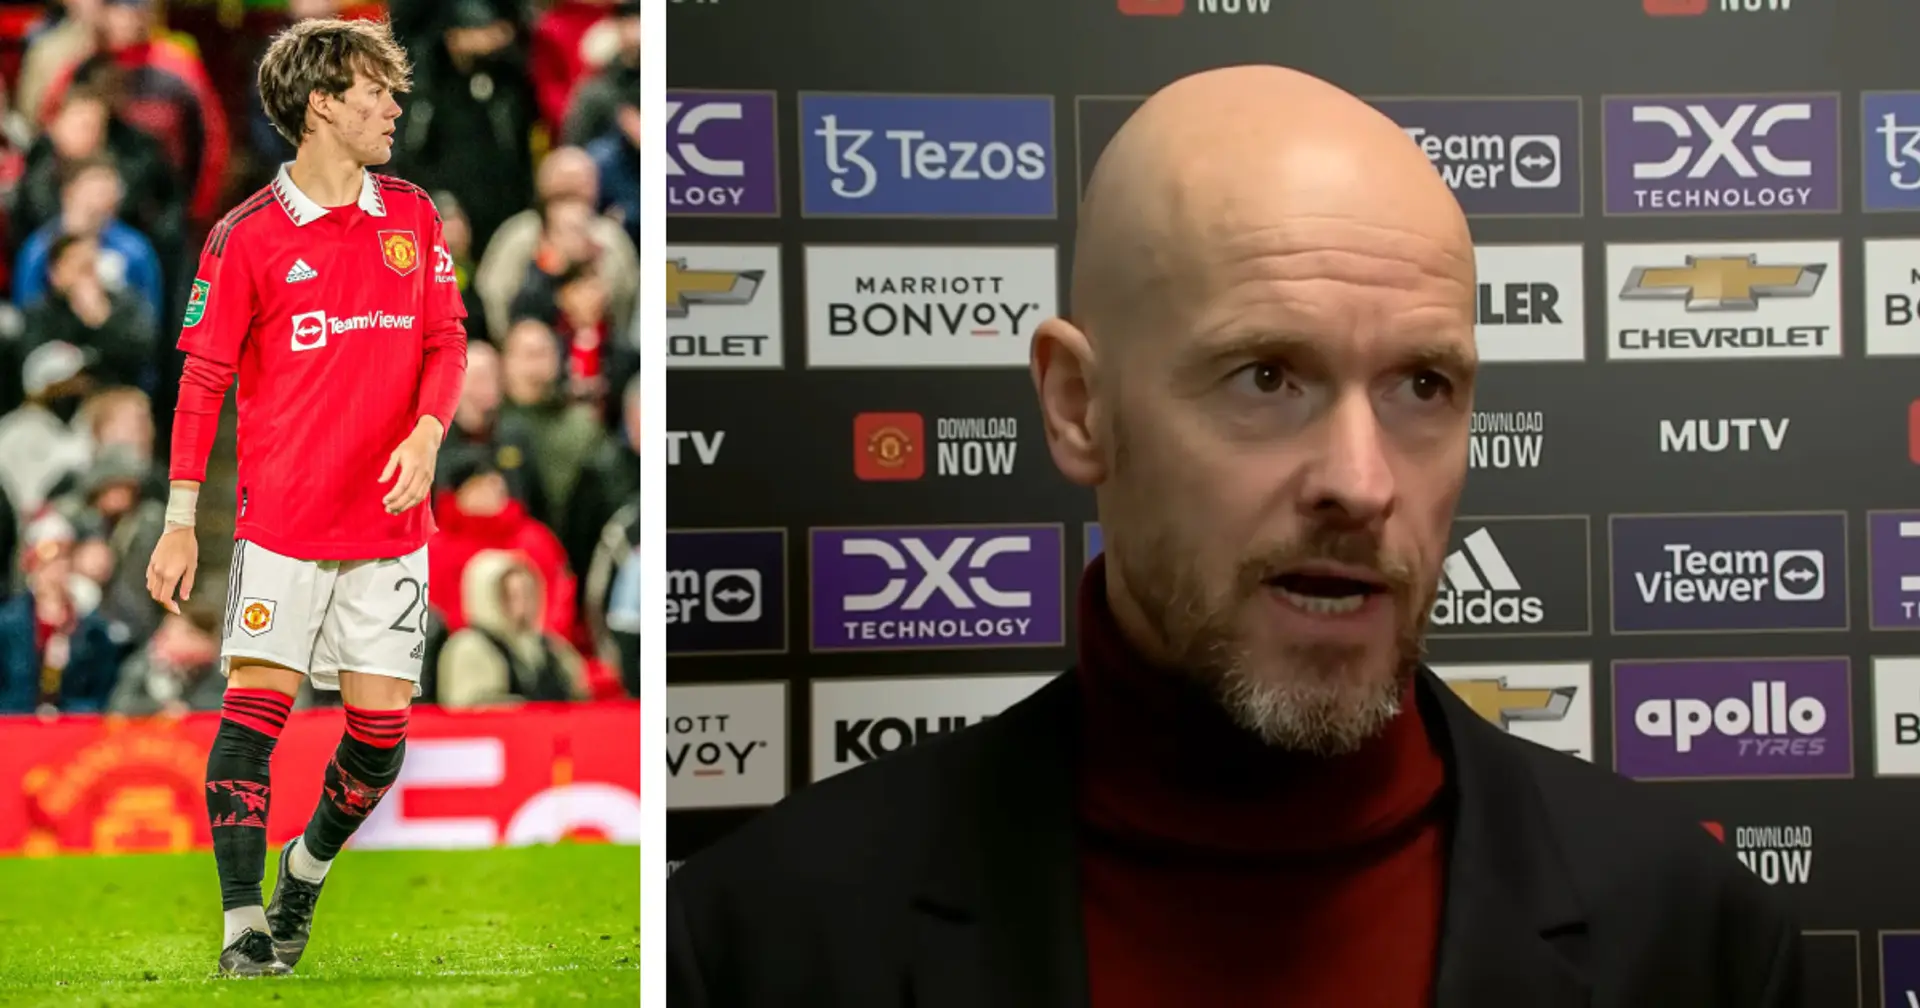 Facundo Pellistri makes Man United debut 828 days after joining — he and Ten Hag react